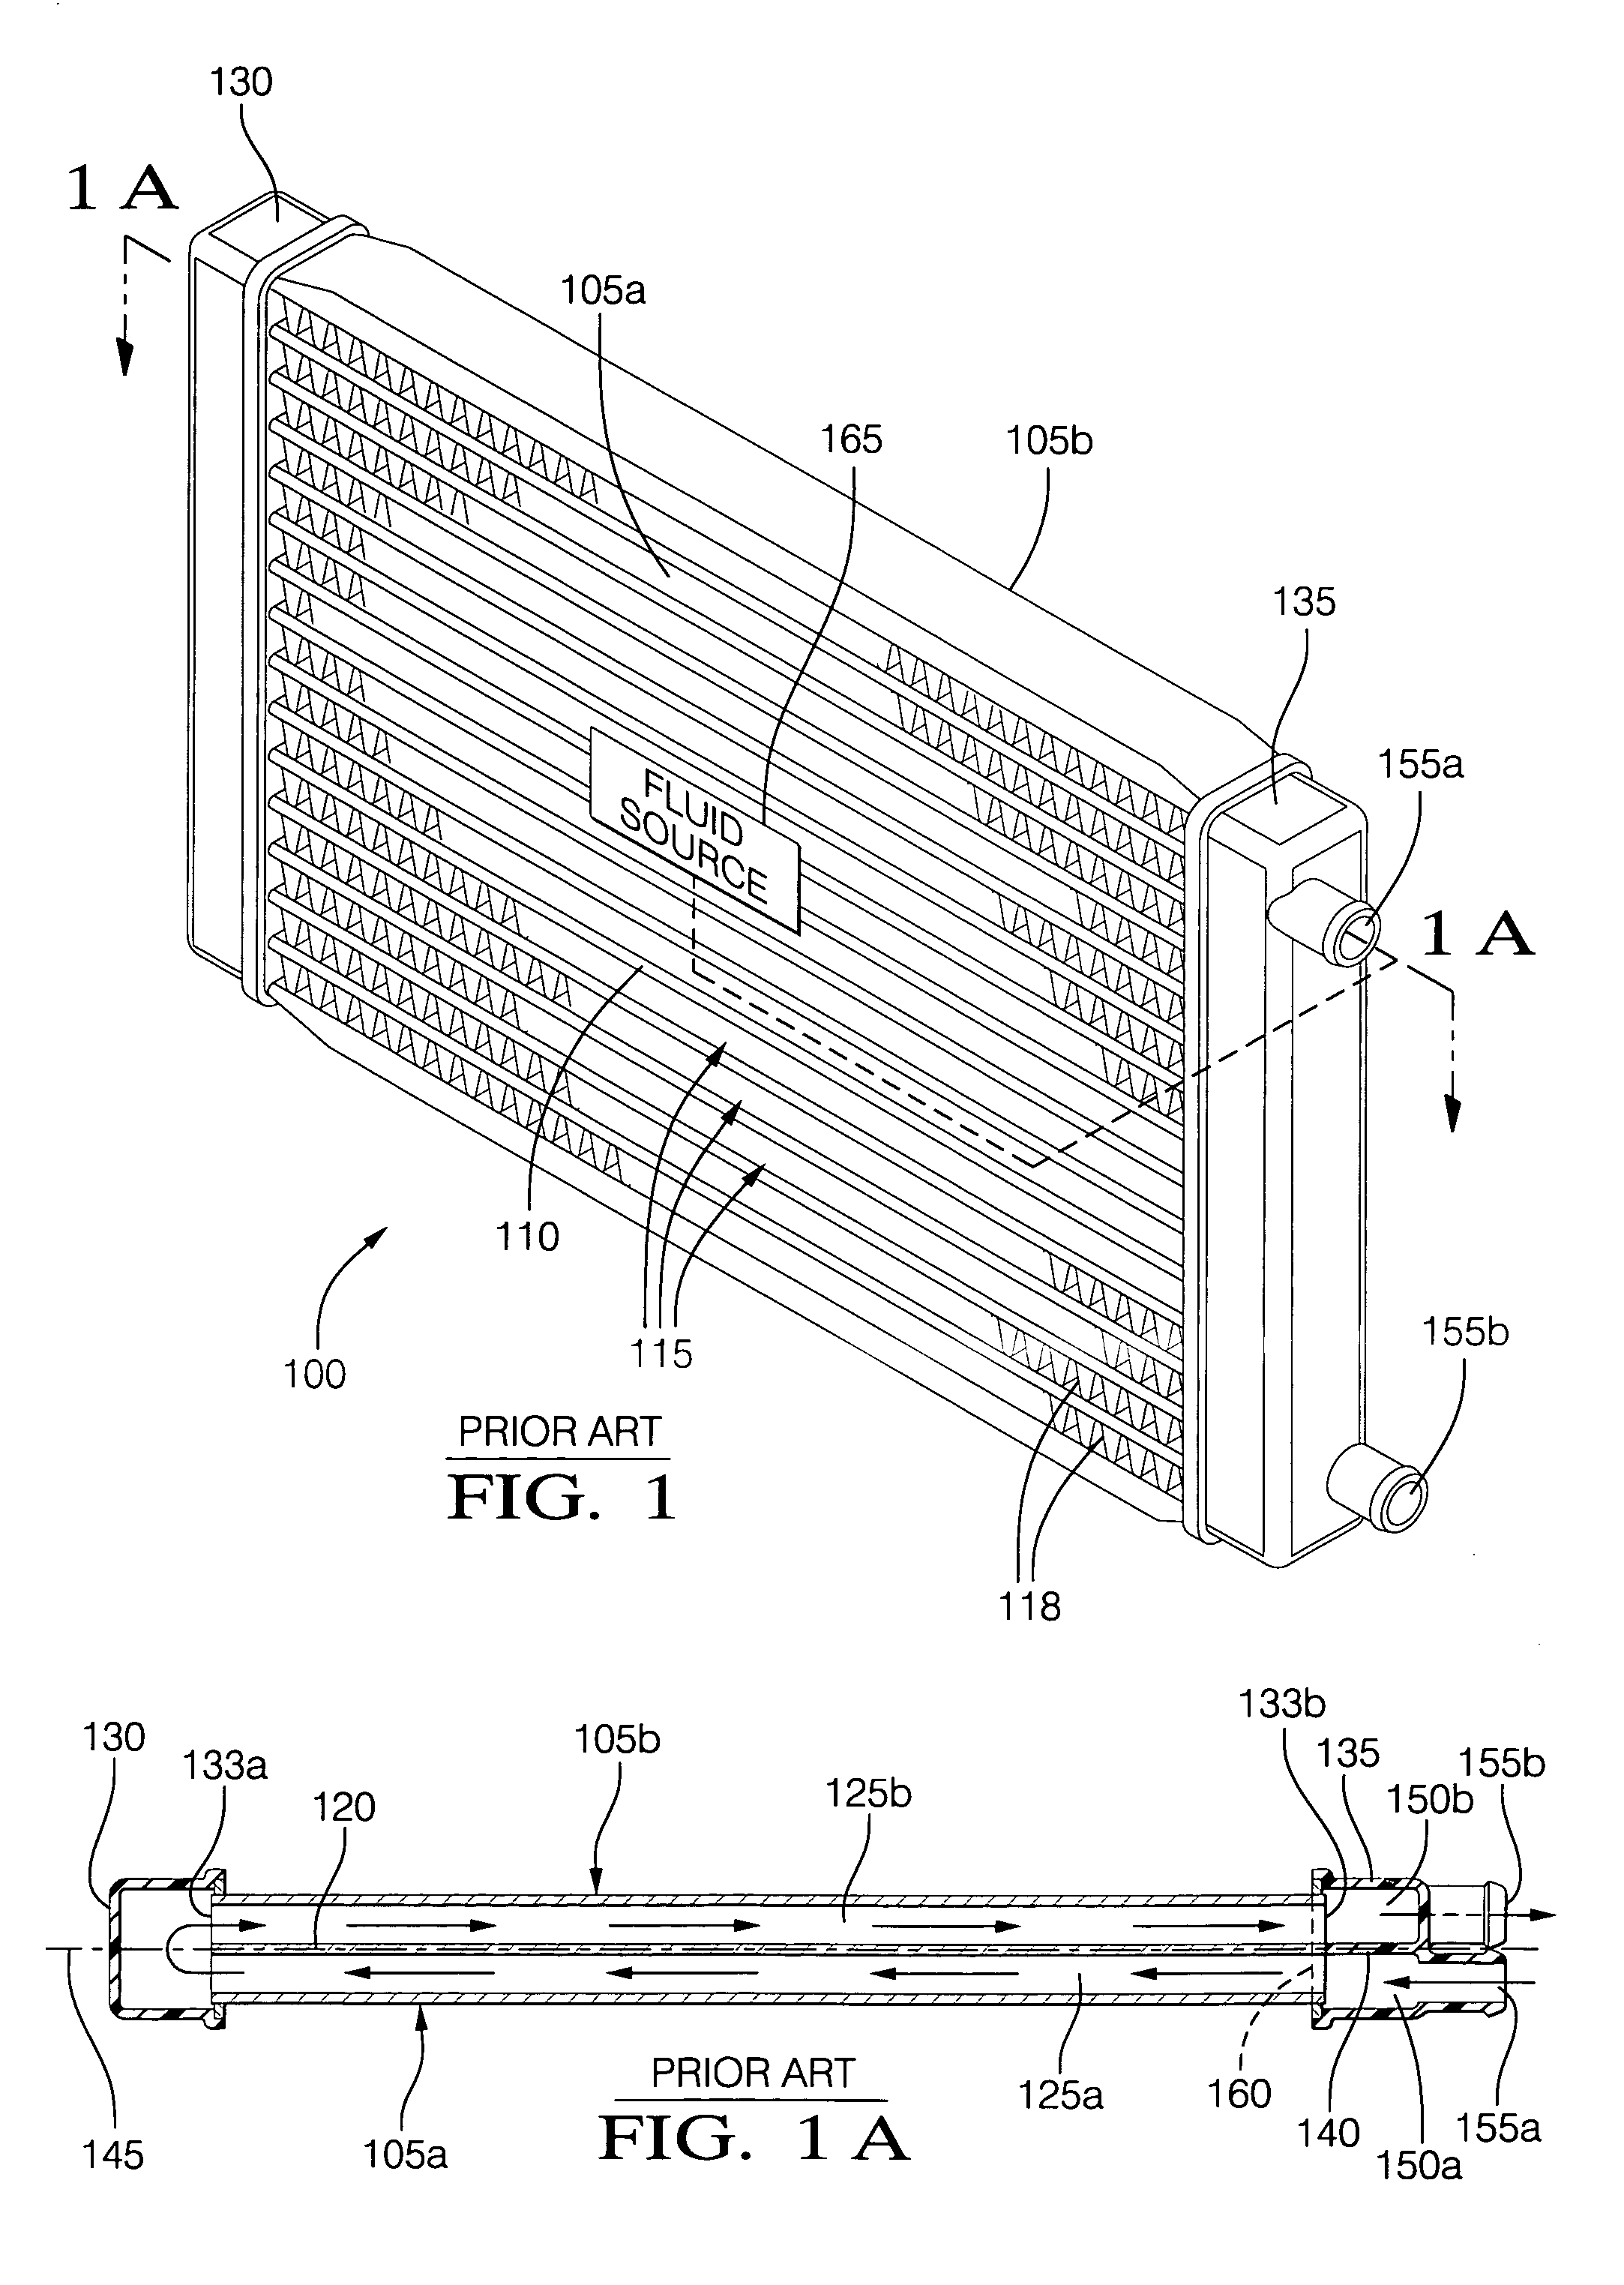 Contra-tapered tank design for cross-counterflow radiator